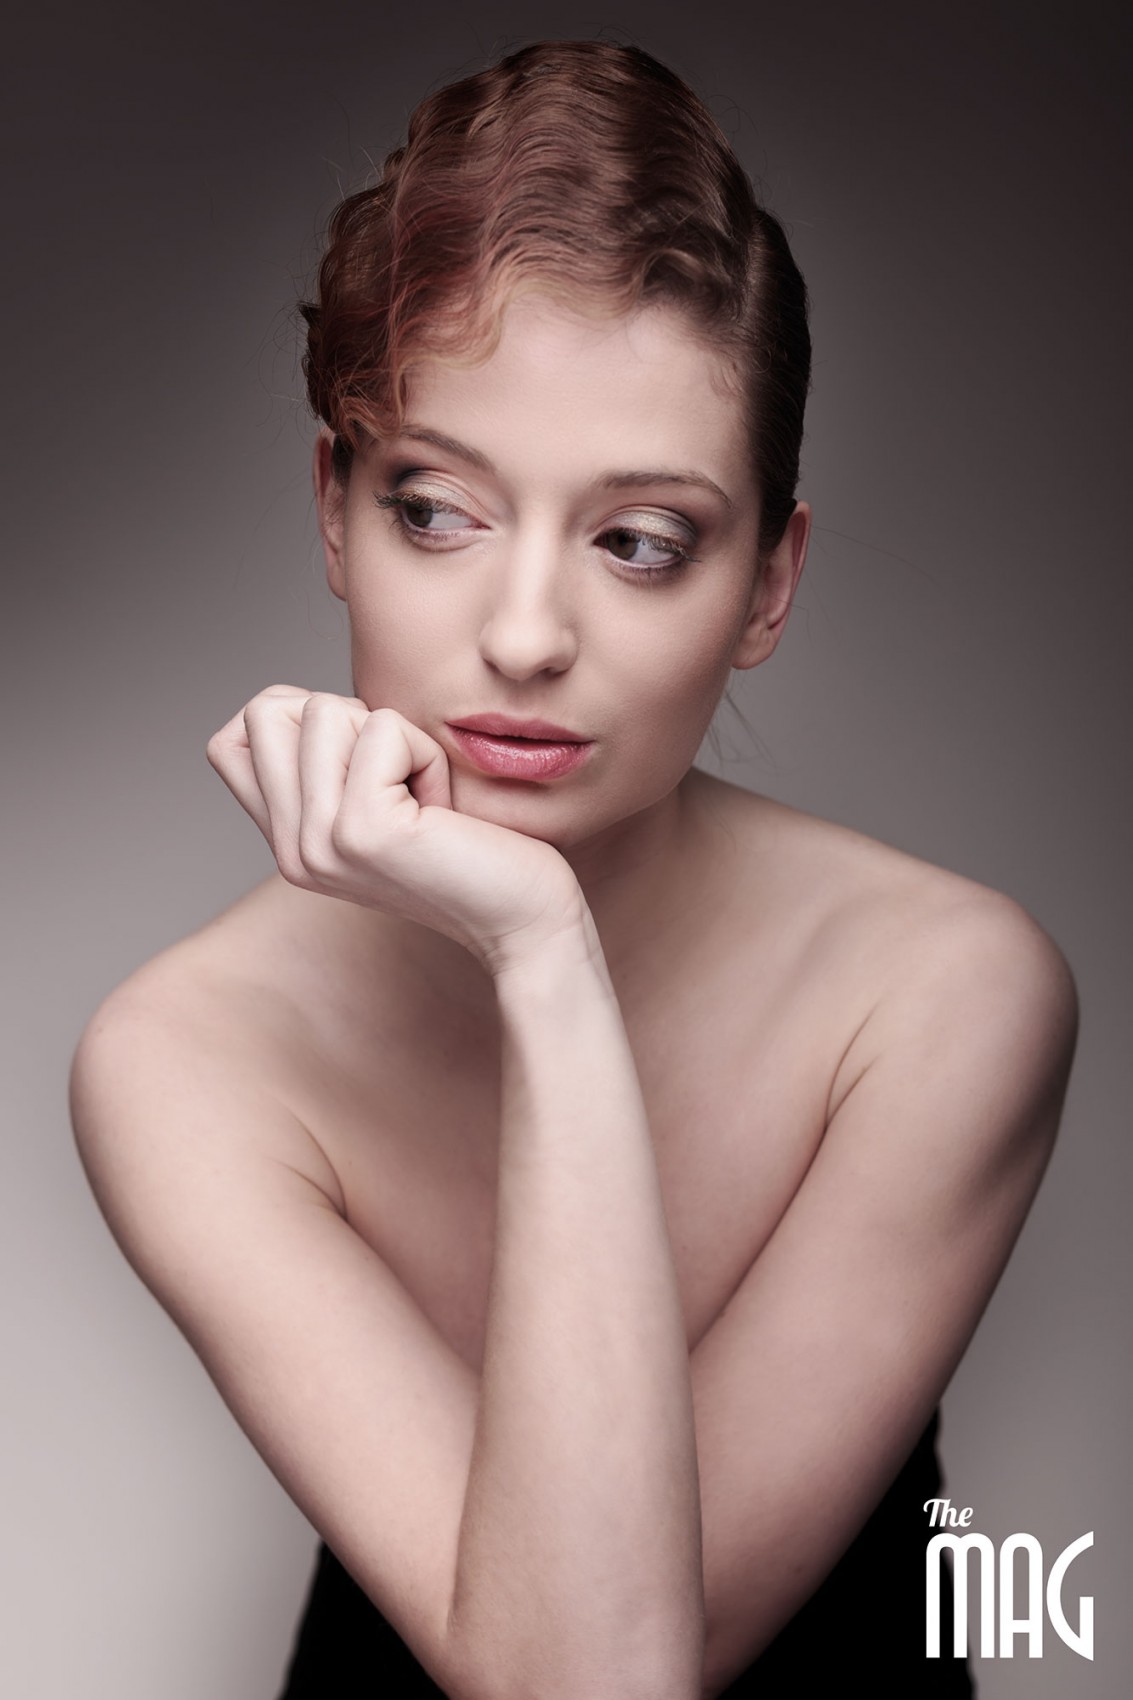 The Mag - Ginger Beauty con Veronica Riguccini